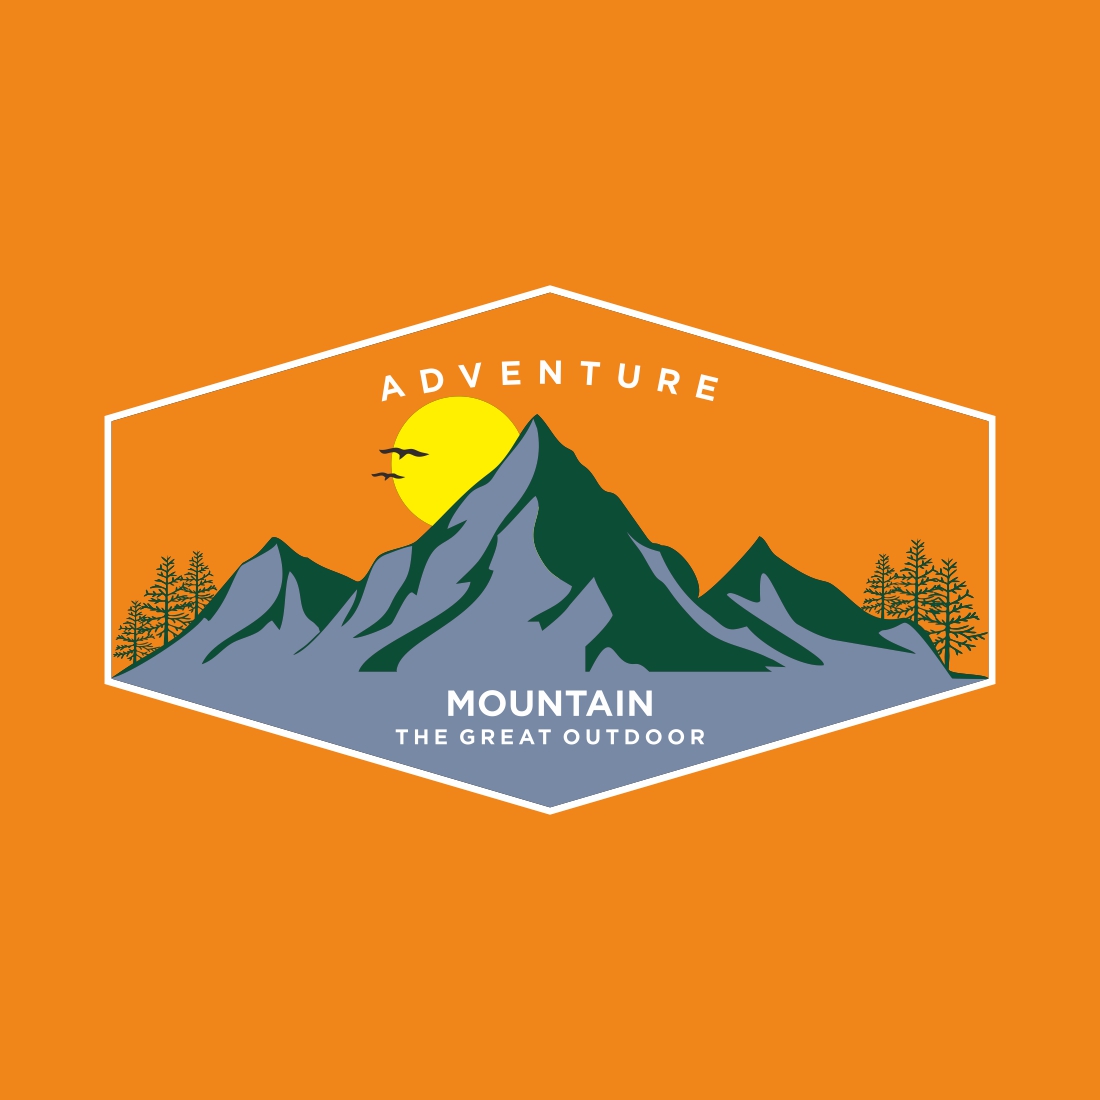 Mountain logo outdoor emblem circle adventure wildlife pine tree forest design, hiking exploration nature preview image.